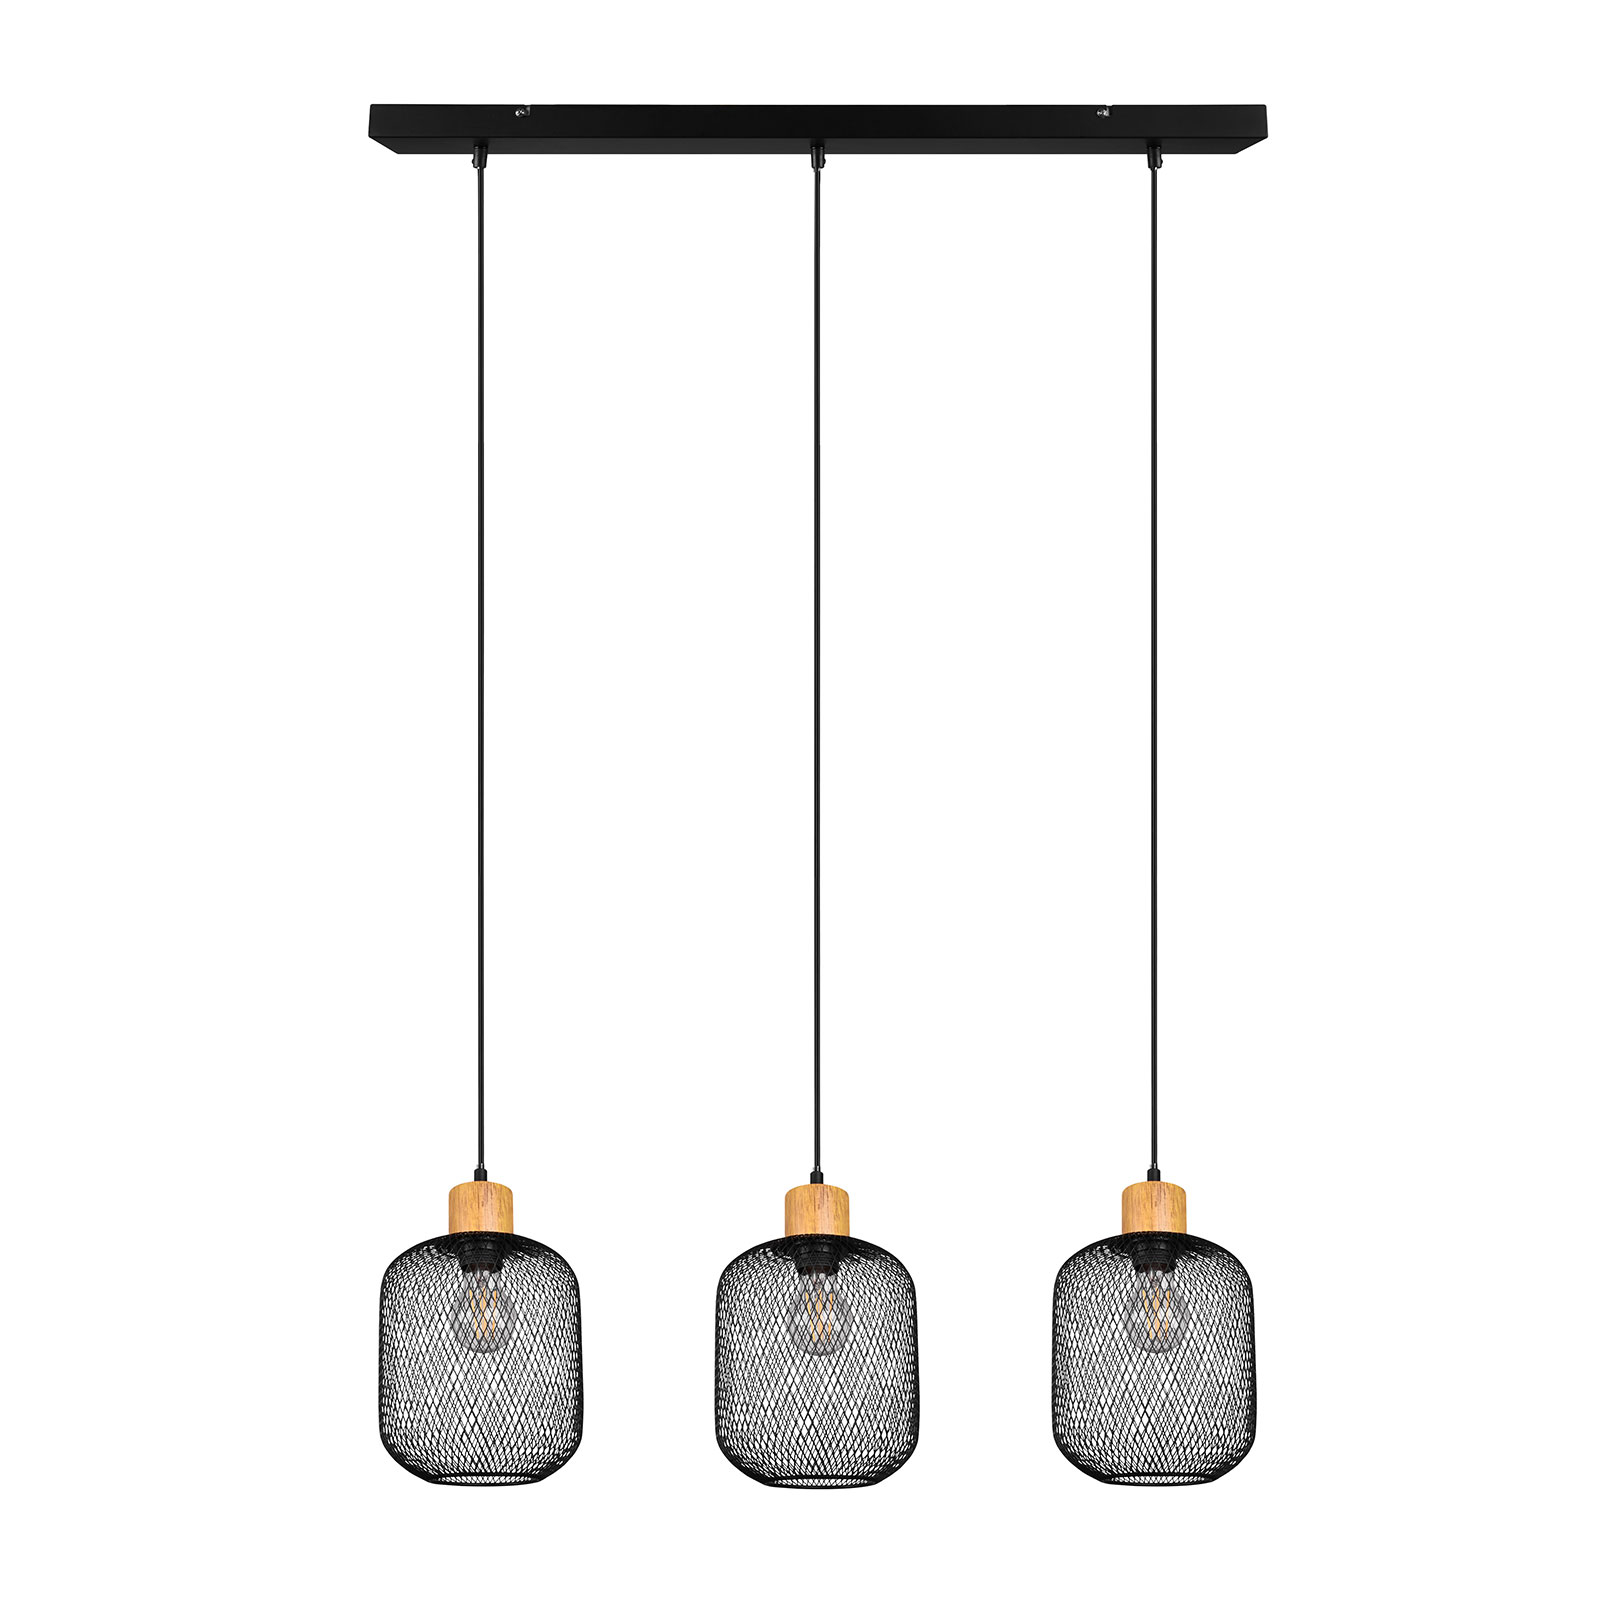 Calimero hanging light cage look 3-bulb